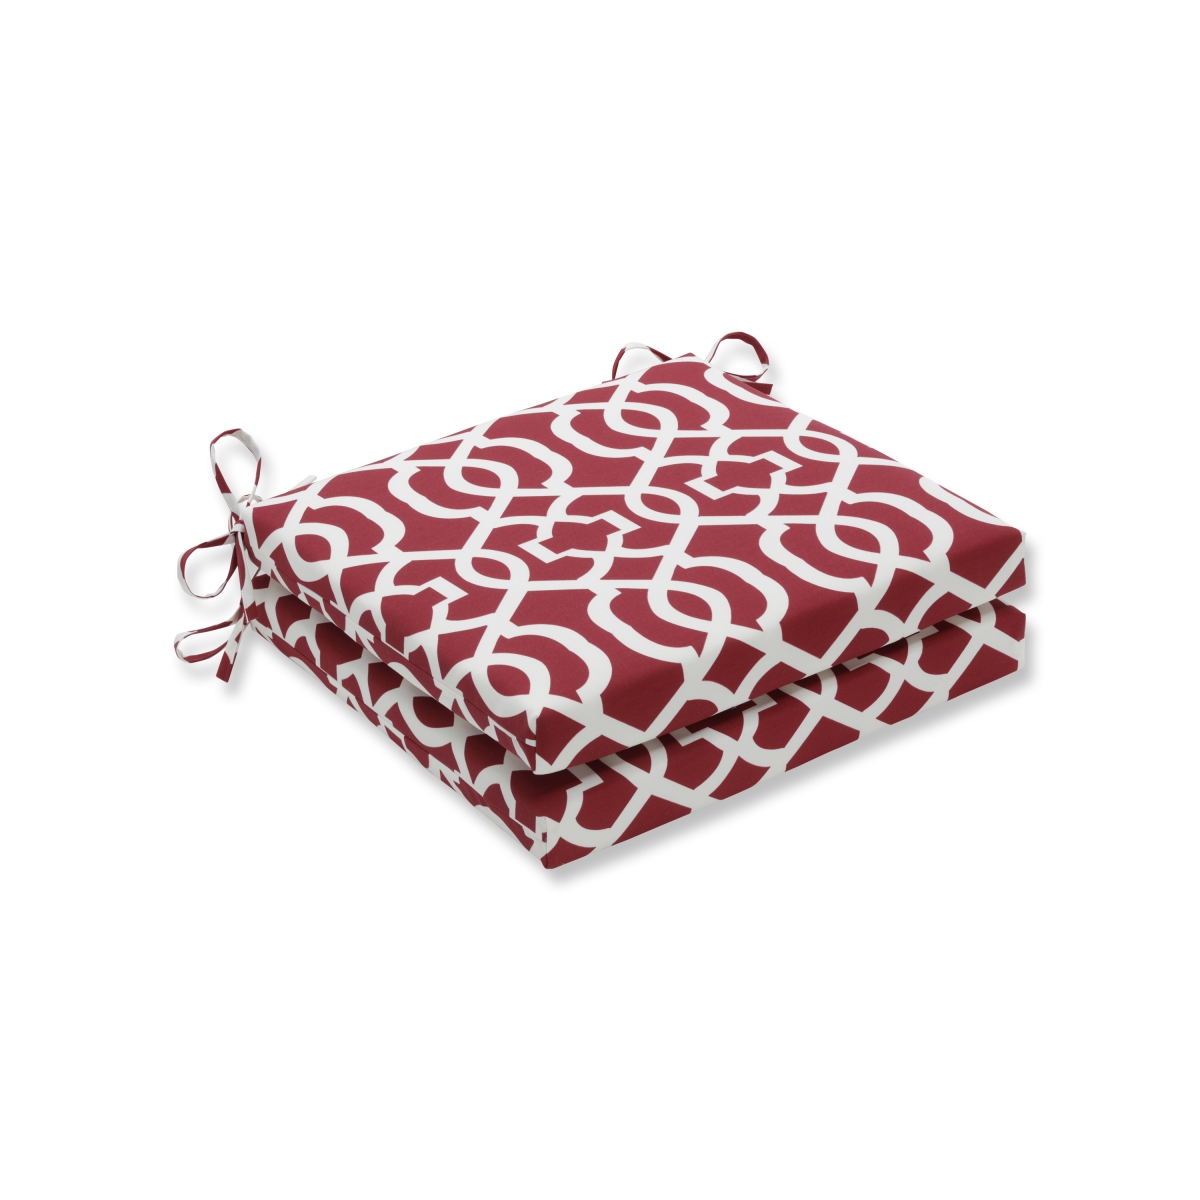 20 X 20 X 3 In. Outdoor & Indoor New Geo Squared Corners Seat Cushion, Red - Set Of 2